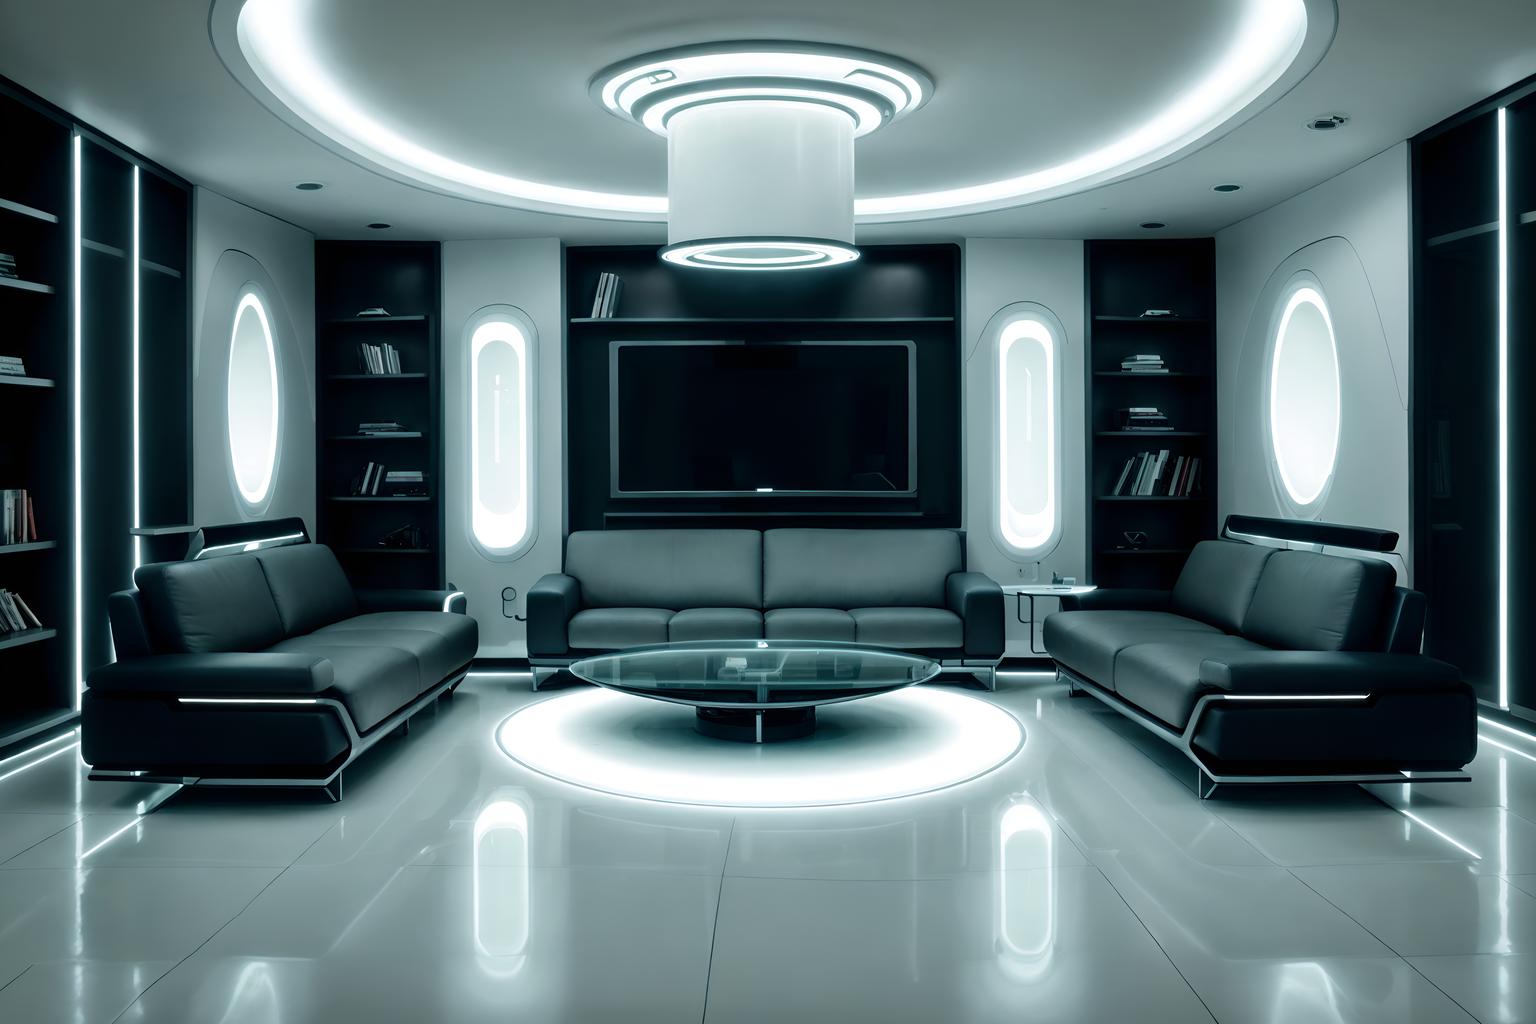 Futuristic-style (living room interior) With televisions and sofa and furniture and rug and plant and occasional tables and chairs and bookshelves. . With minimalist clean lines and circular shapes and spaceship interior and futurism minimalist interior and glass panes and light colors and futurism and futuristic interior. . Cinematic photo, highly detailed, cinematic lighting, ultra-detailed, ultrarealistic, photorealism, 8k. Futuristic interior design style